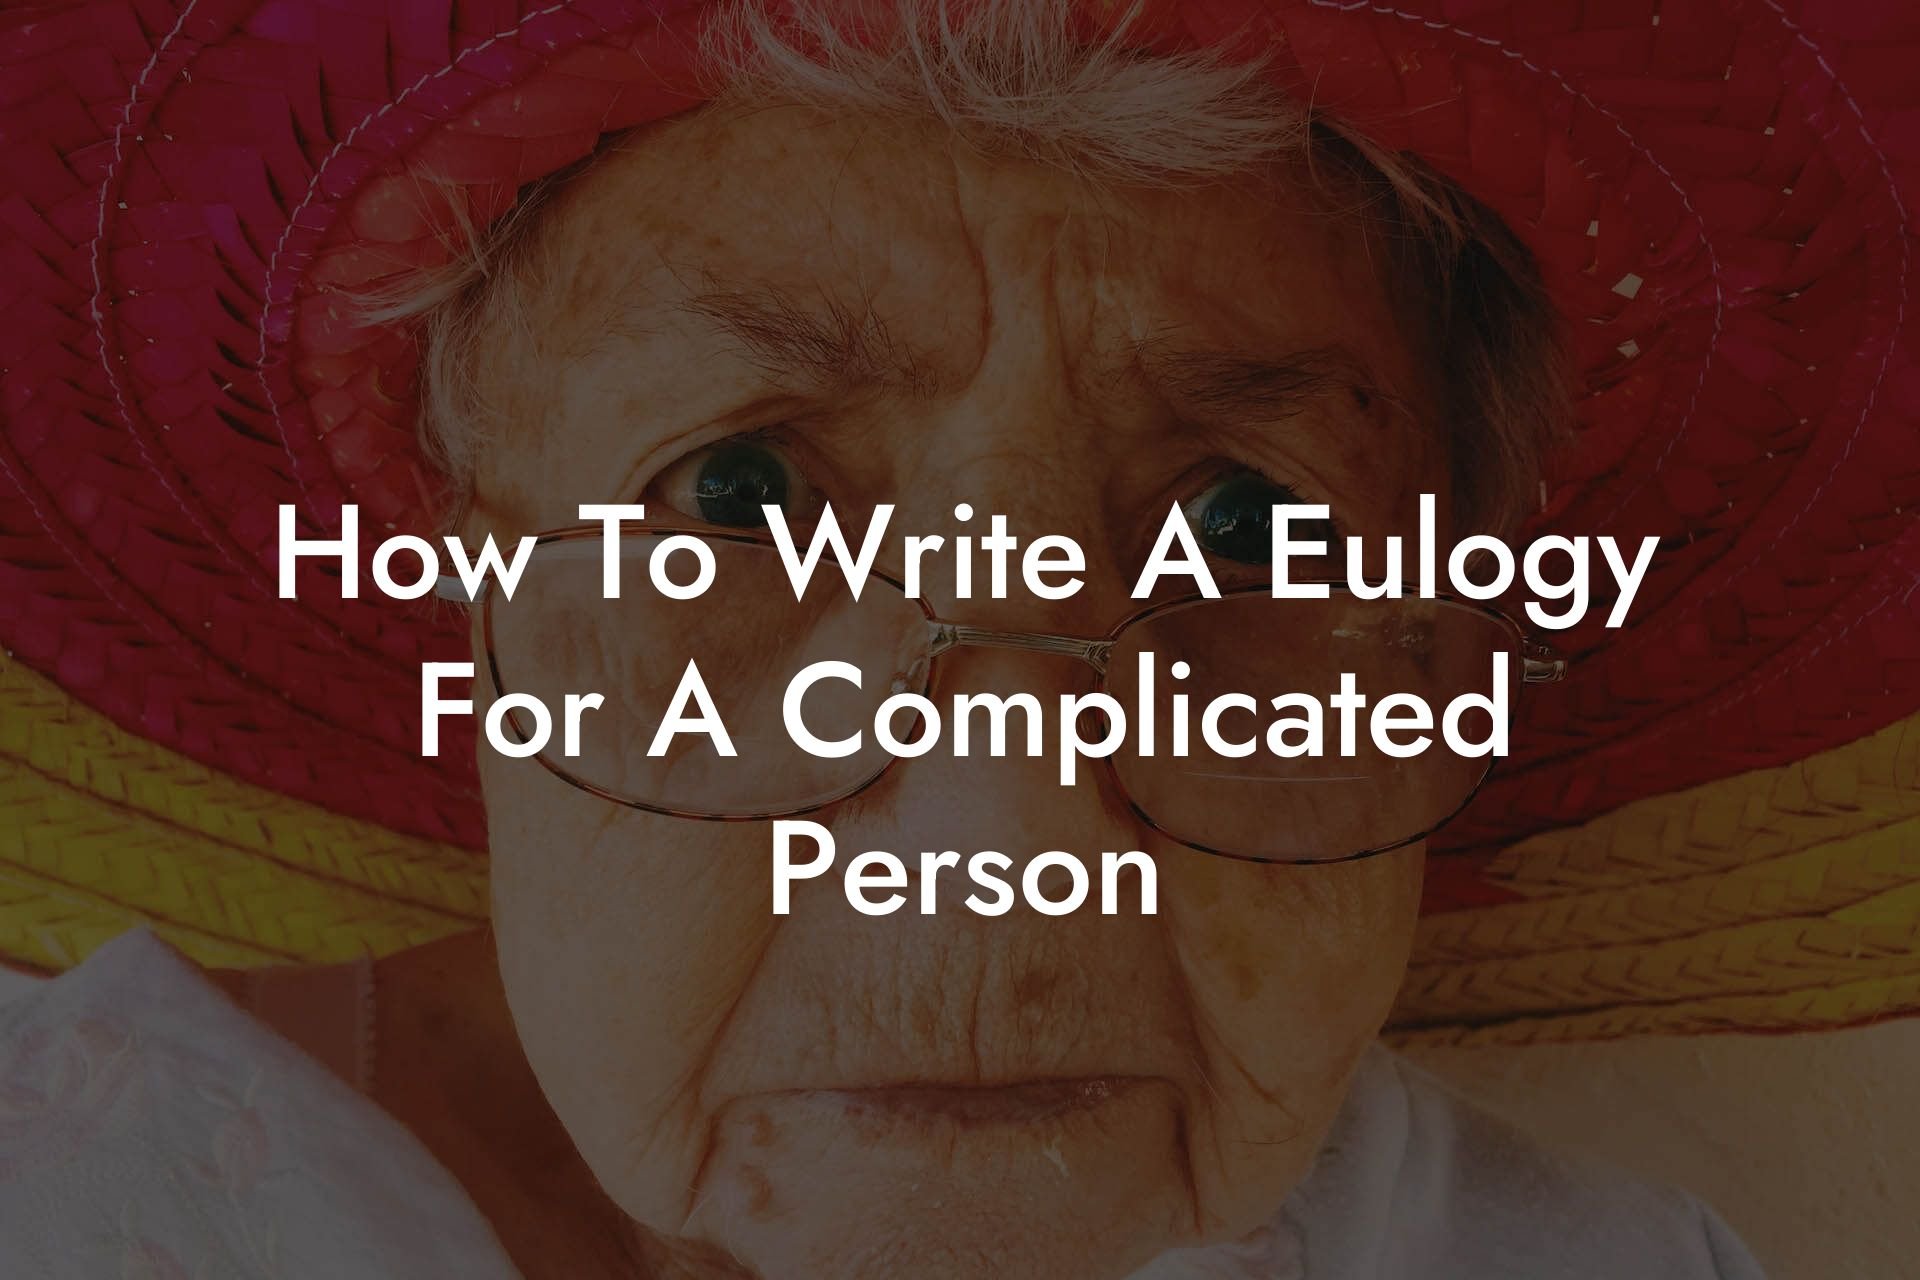 How To Write A Eulogy For A Complicated Person